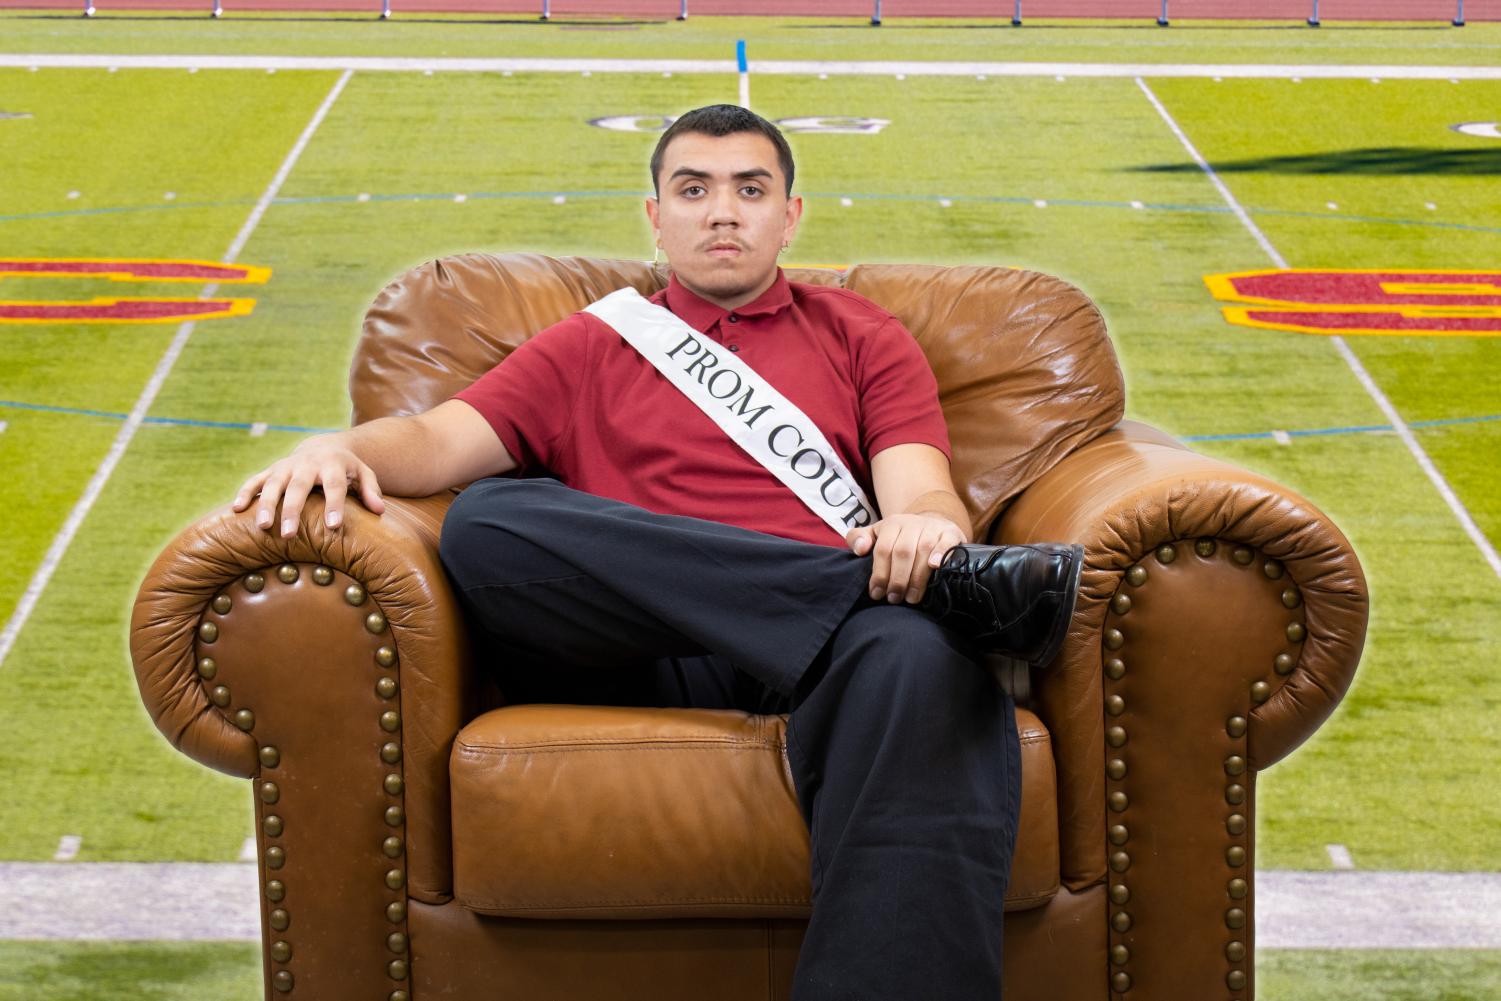 The Pepper Bough Prom Court Jacob Ramos Overcame Adversity To Make His Senior Year Memorable